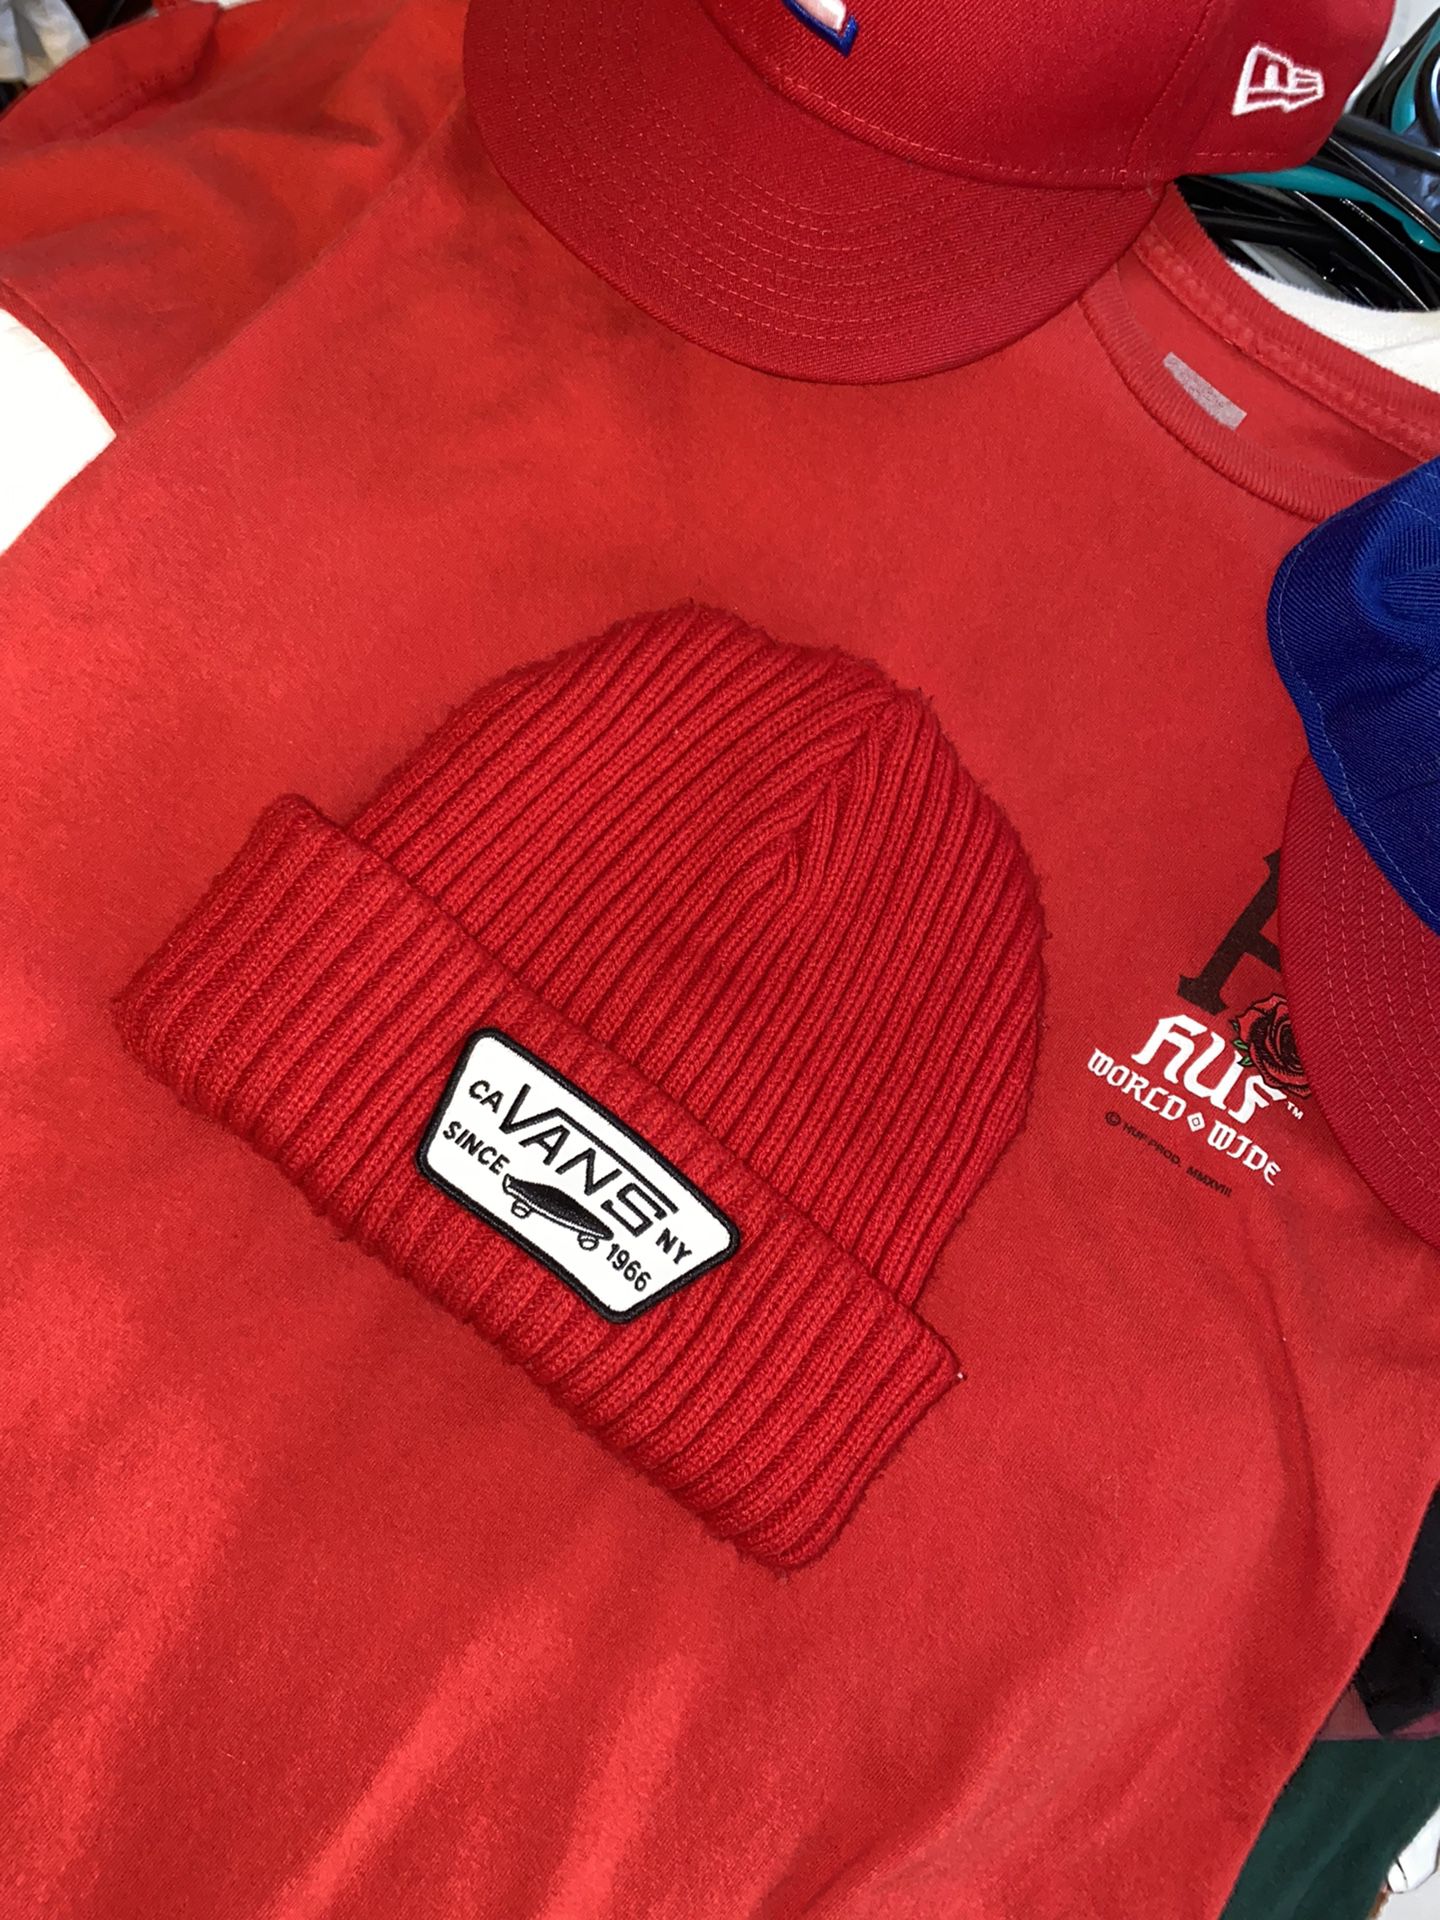 Vans Beanie, Red/white/black, One Size, Fits All